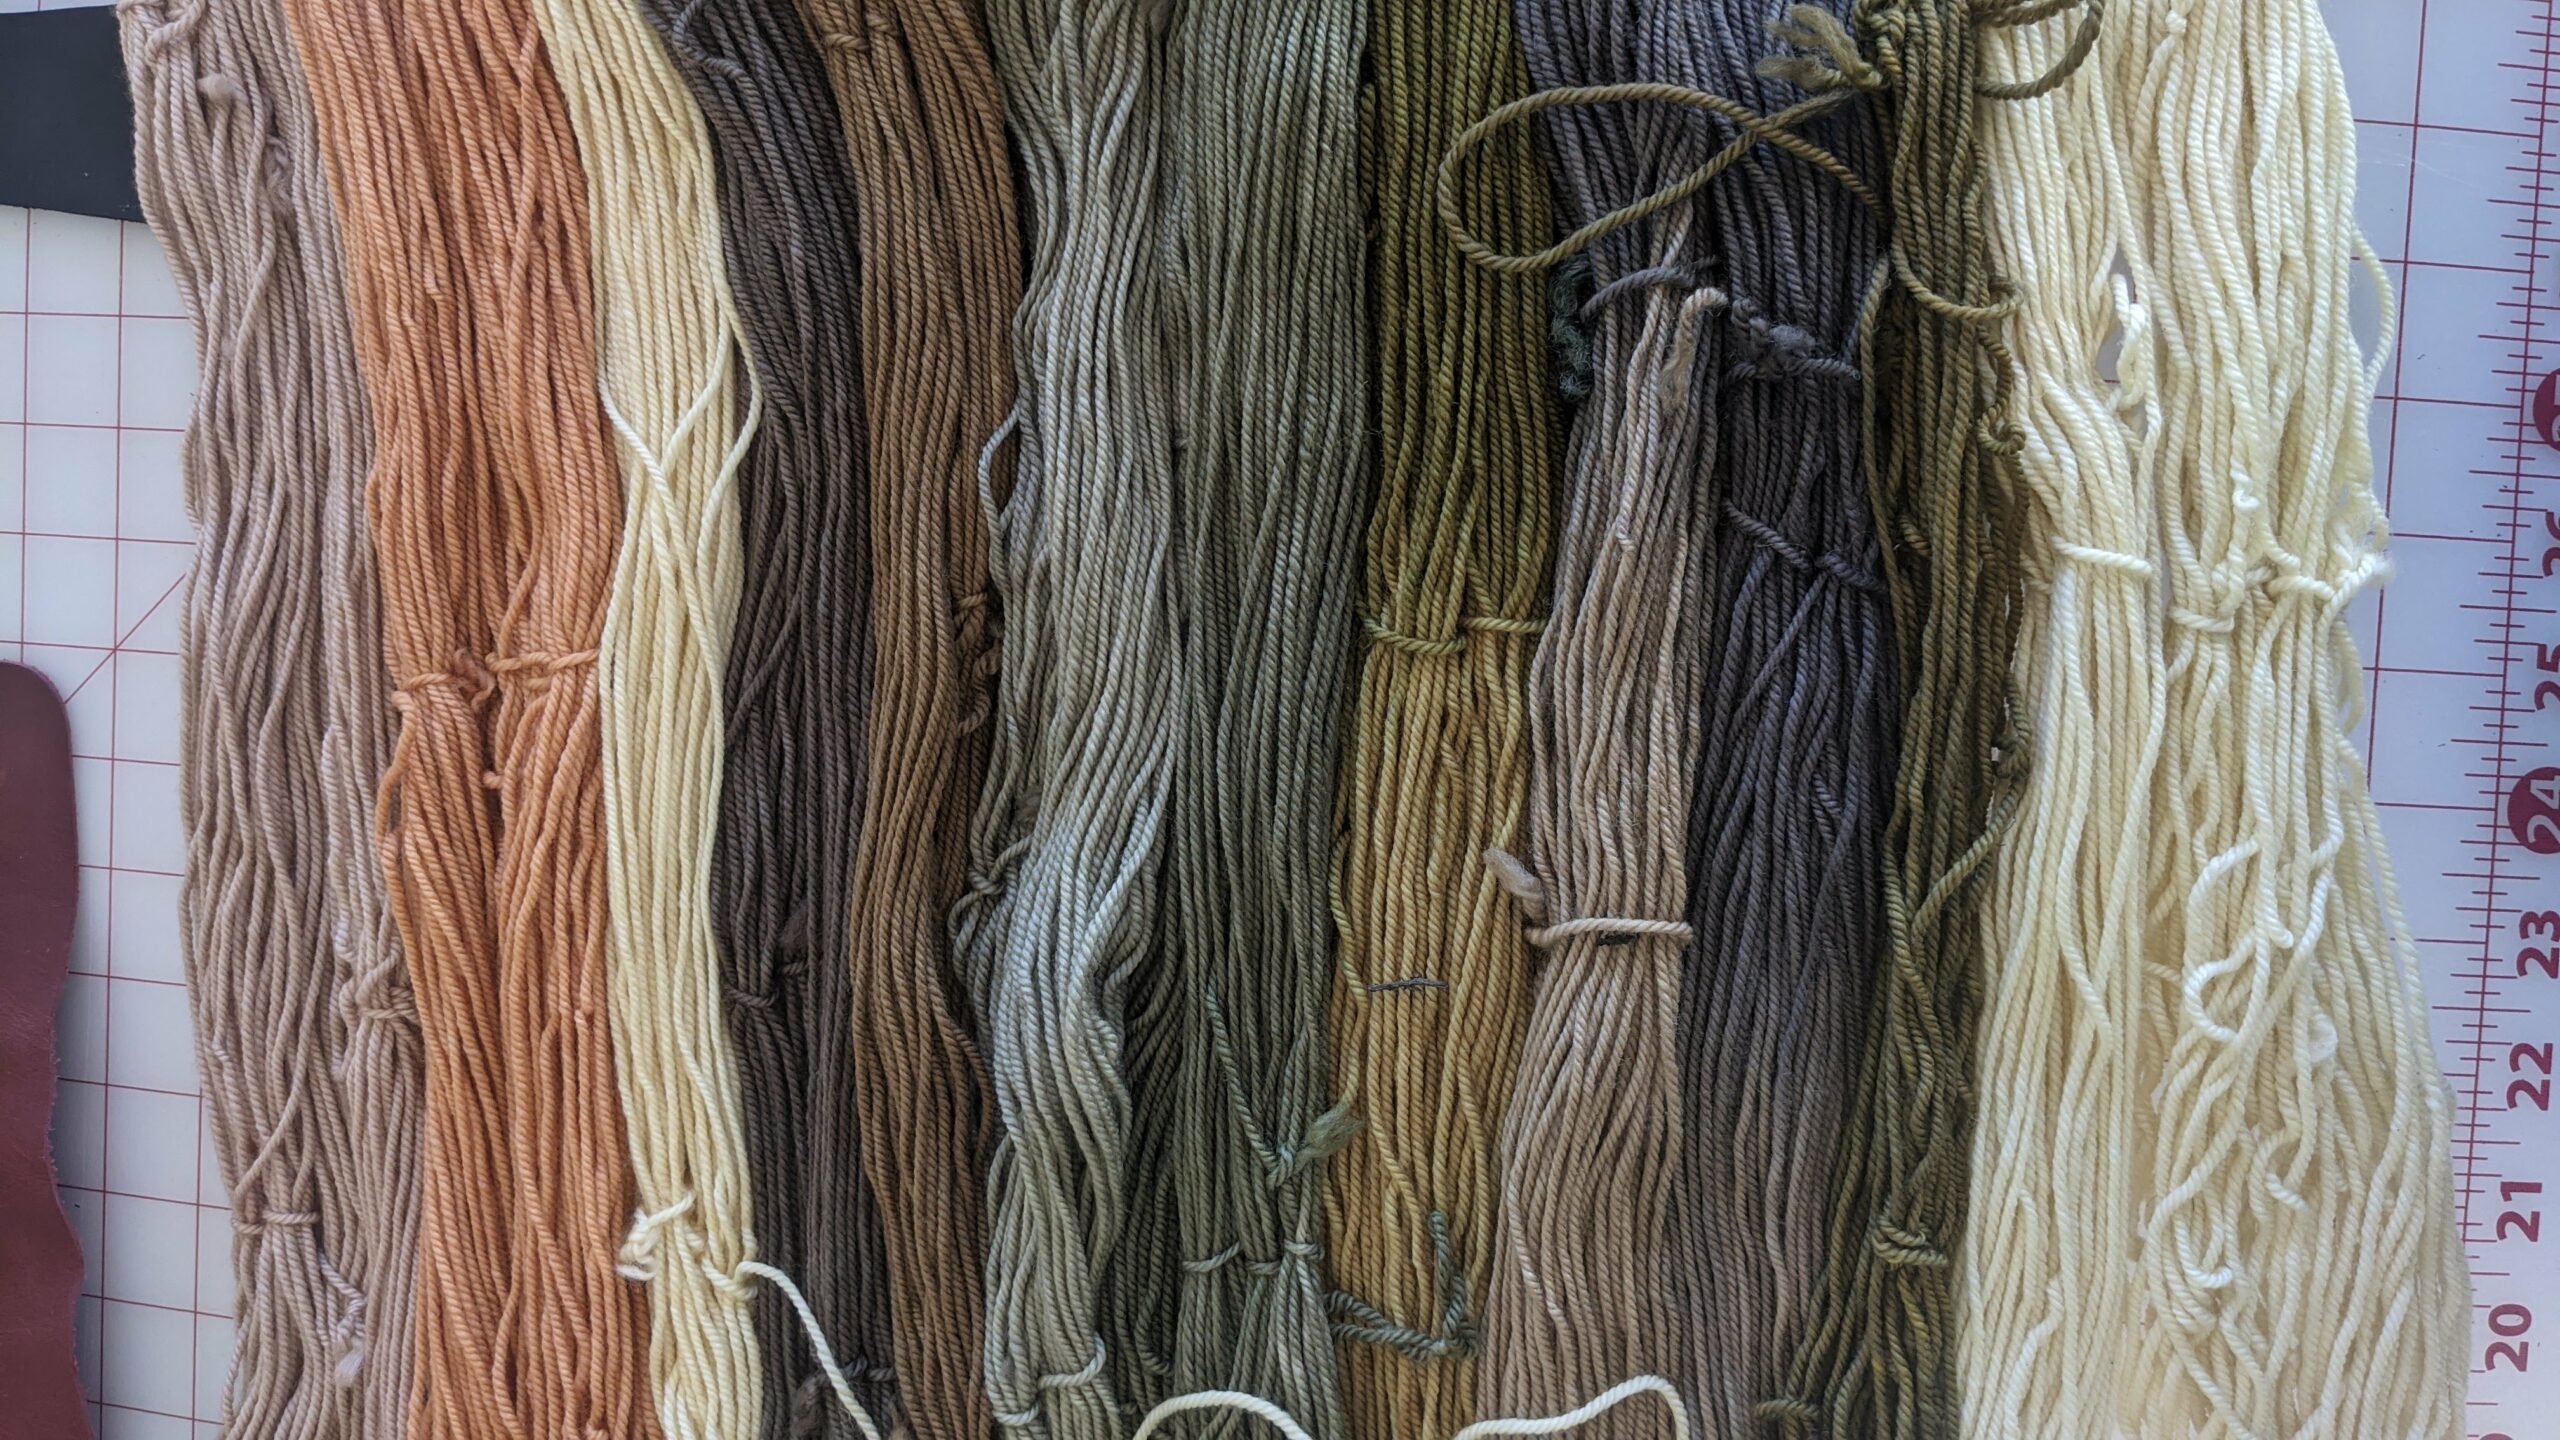 long hanks of naturally dyed wool yarn in pastels and earth tones